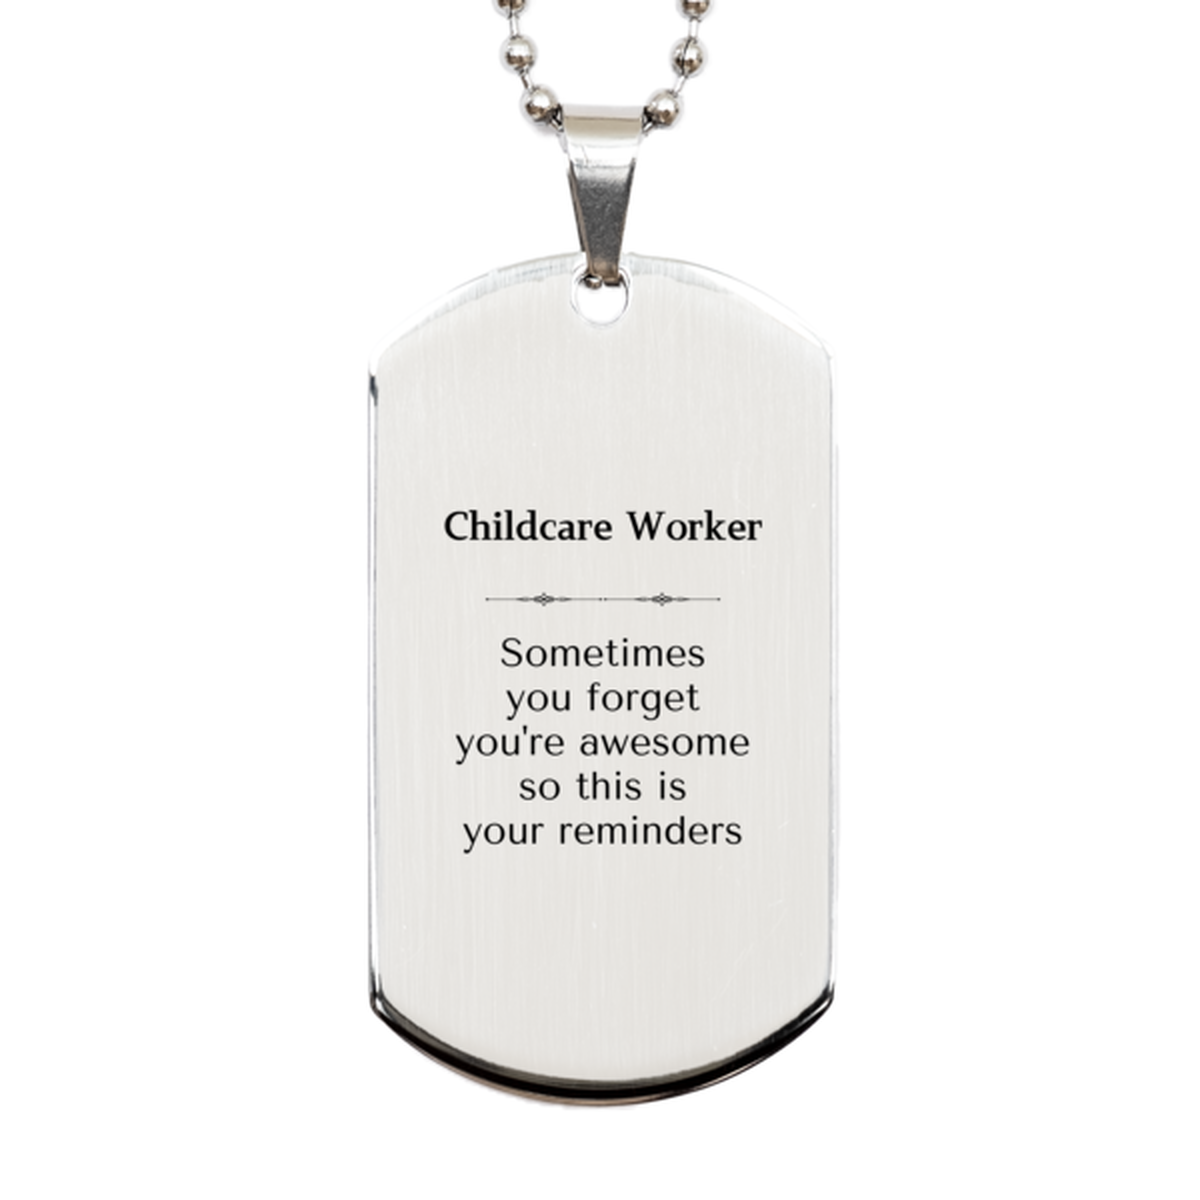 Sentimental Childcare Worker Silver Dog Tag, Childcare Worker Sometimes you forget you're awesome so this is your reminders, Graduation Christmas Birthday Gifts for Childcare Worker, Men, Women, Coworkers